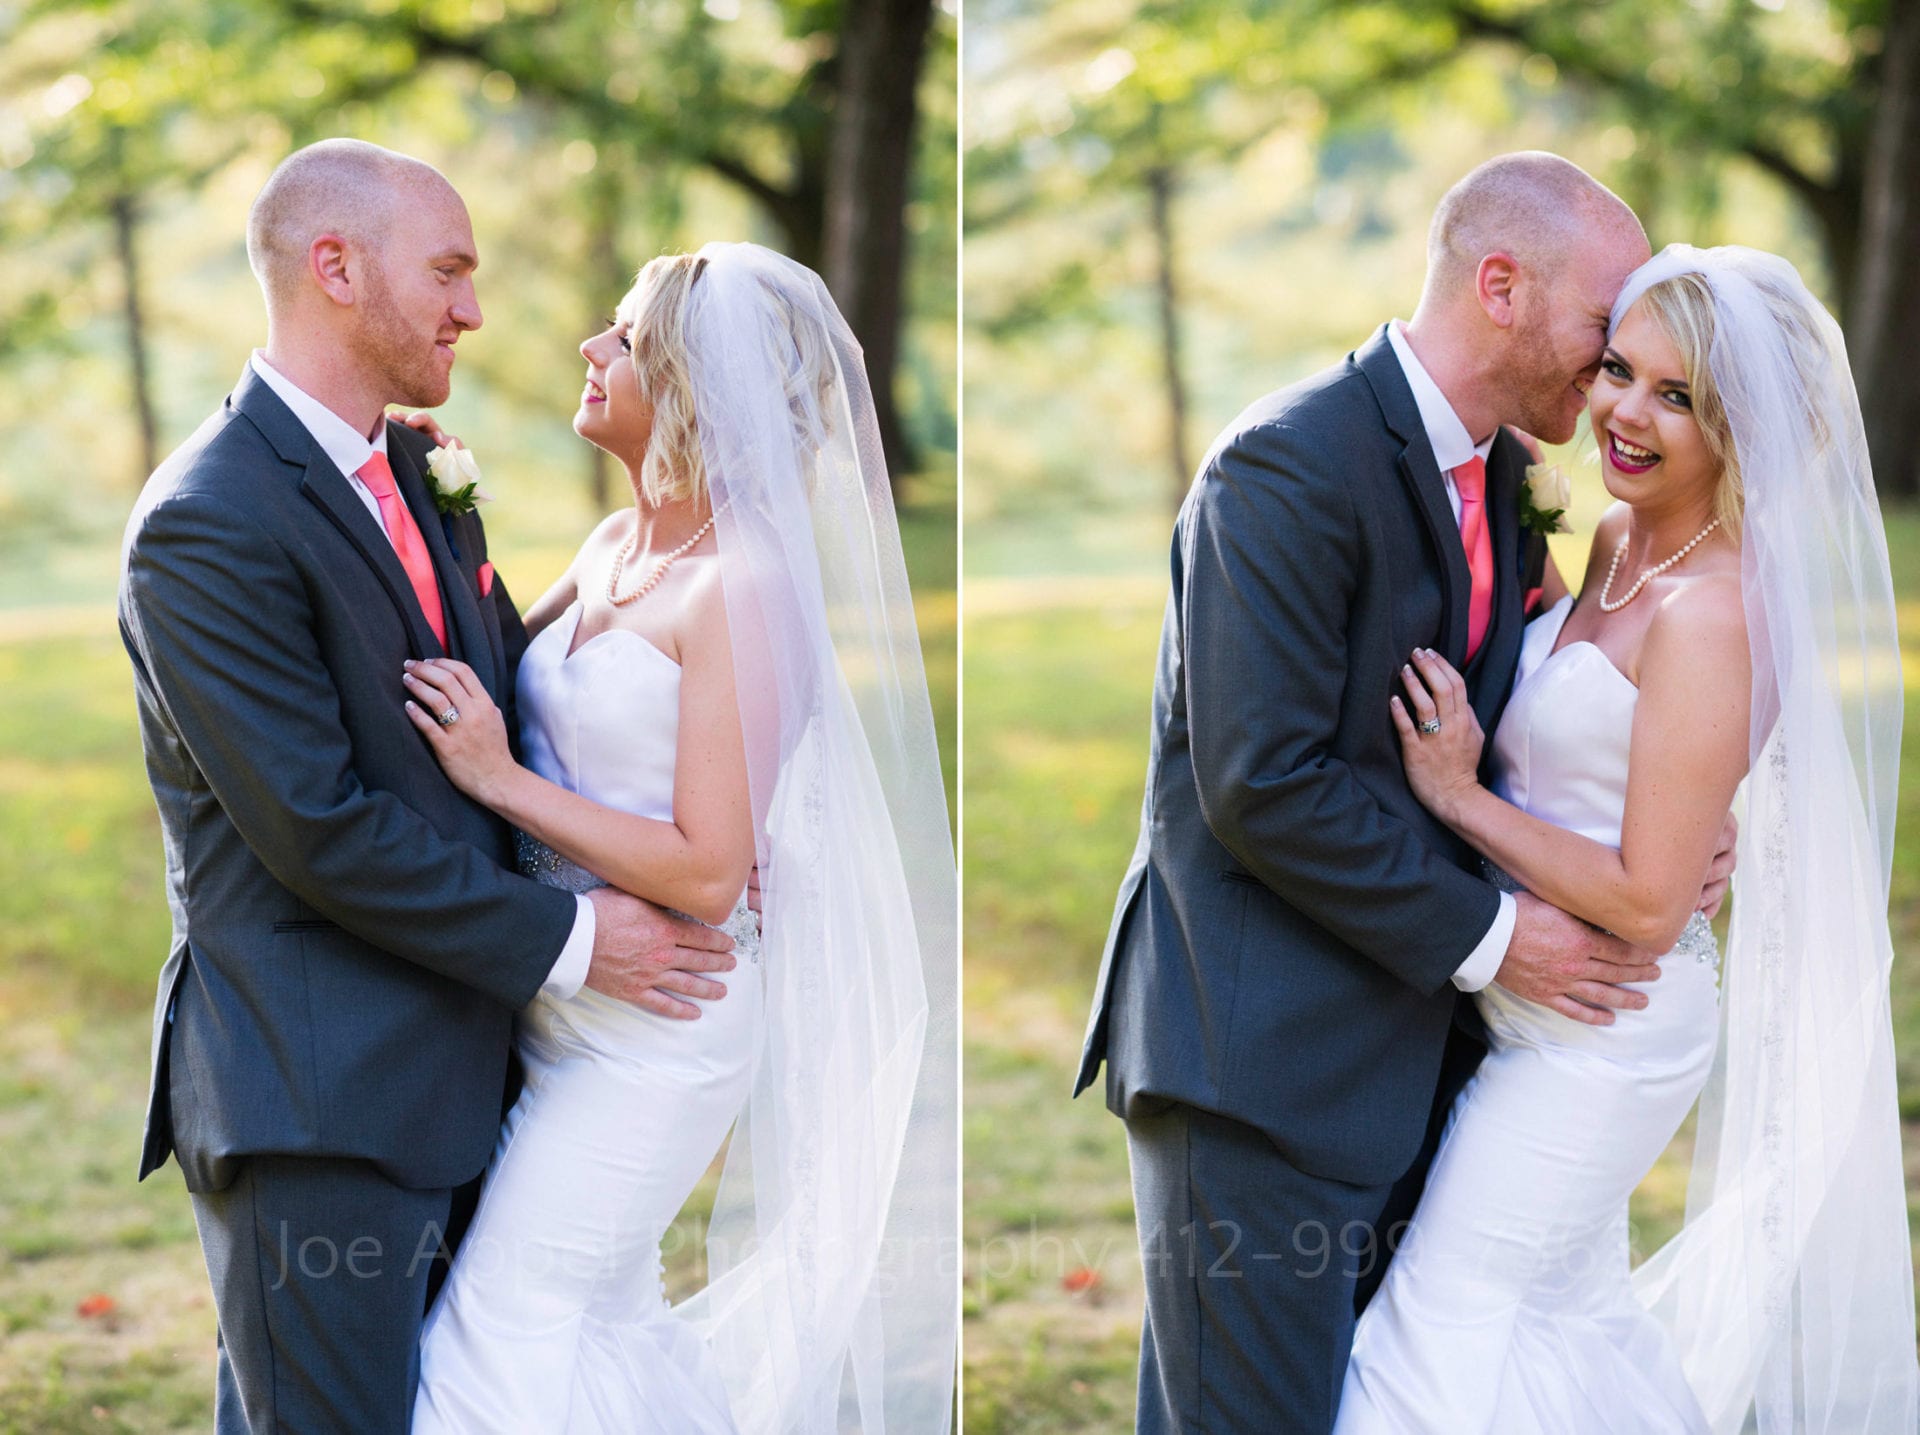 Two photos of a bride and groom who embrace each other. In the first photo the couple looks at each other in the second photo the groom leans into the bride as she turns her head and laughs.